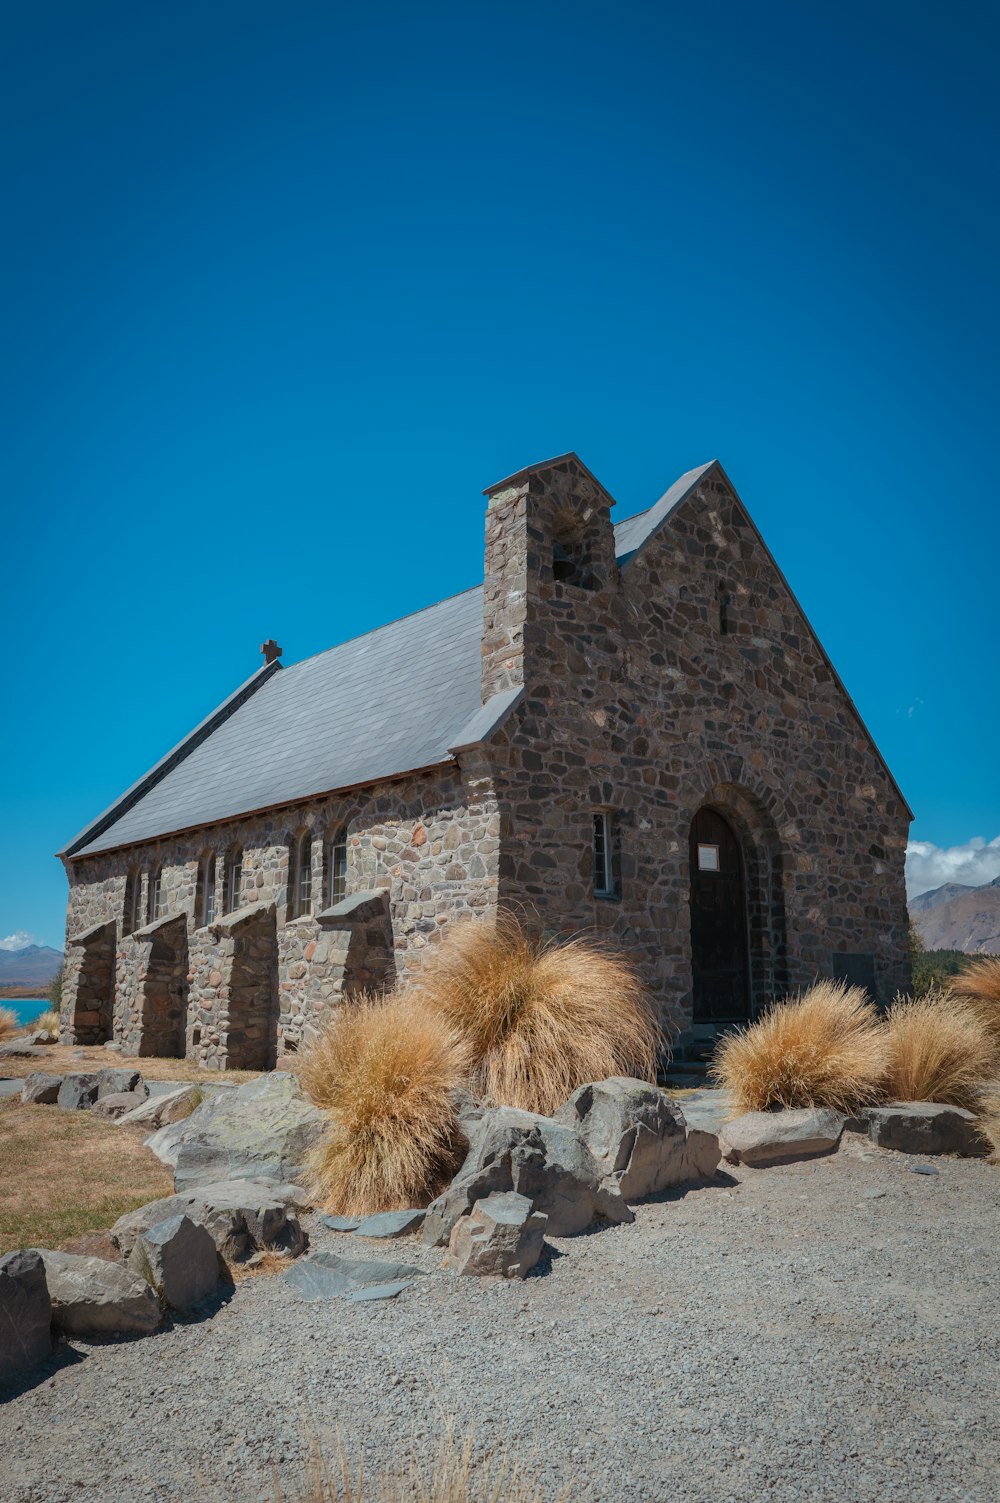 an old stone church with grass and rocks around it